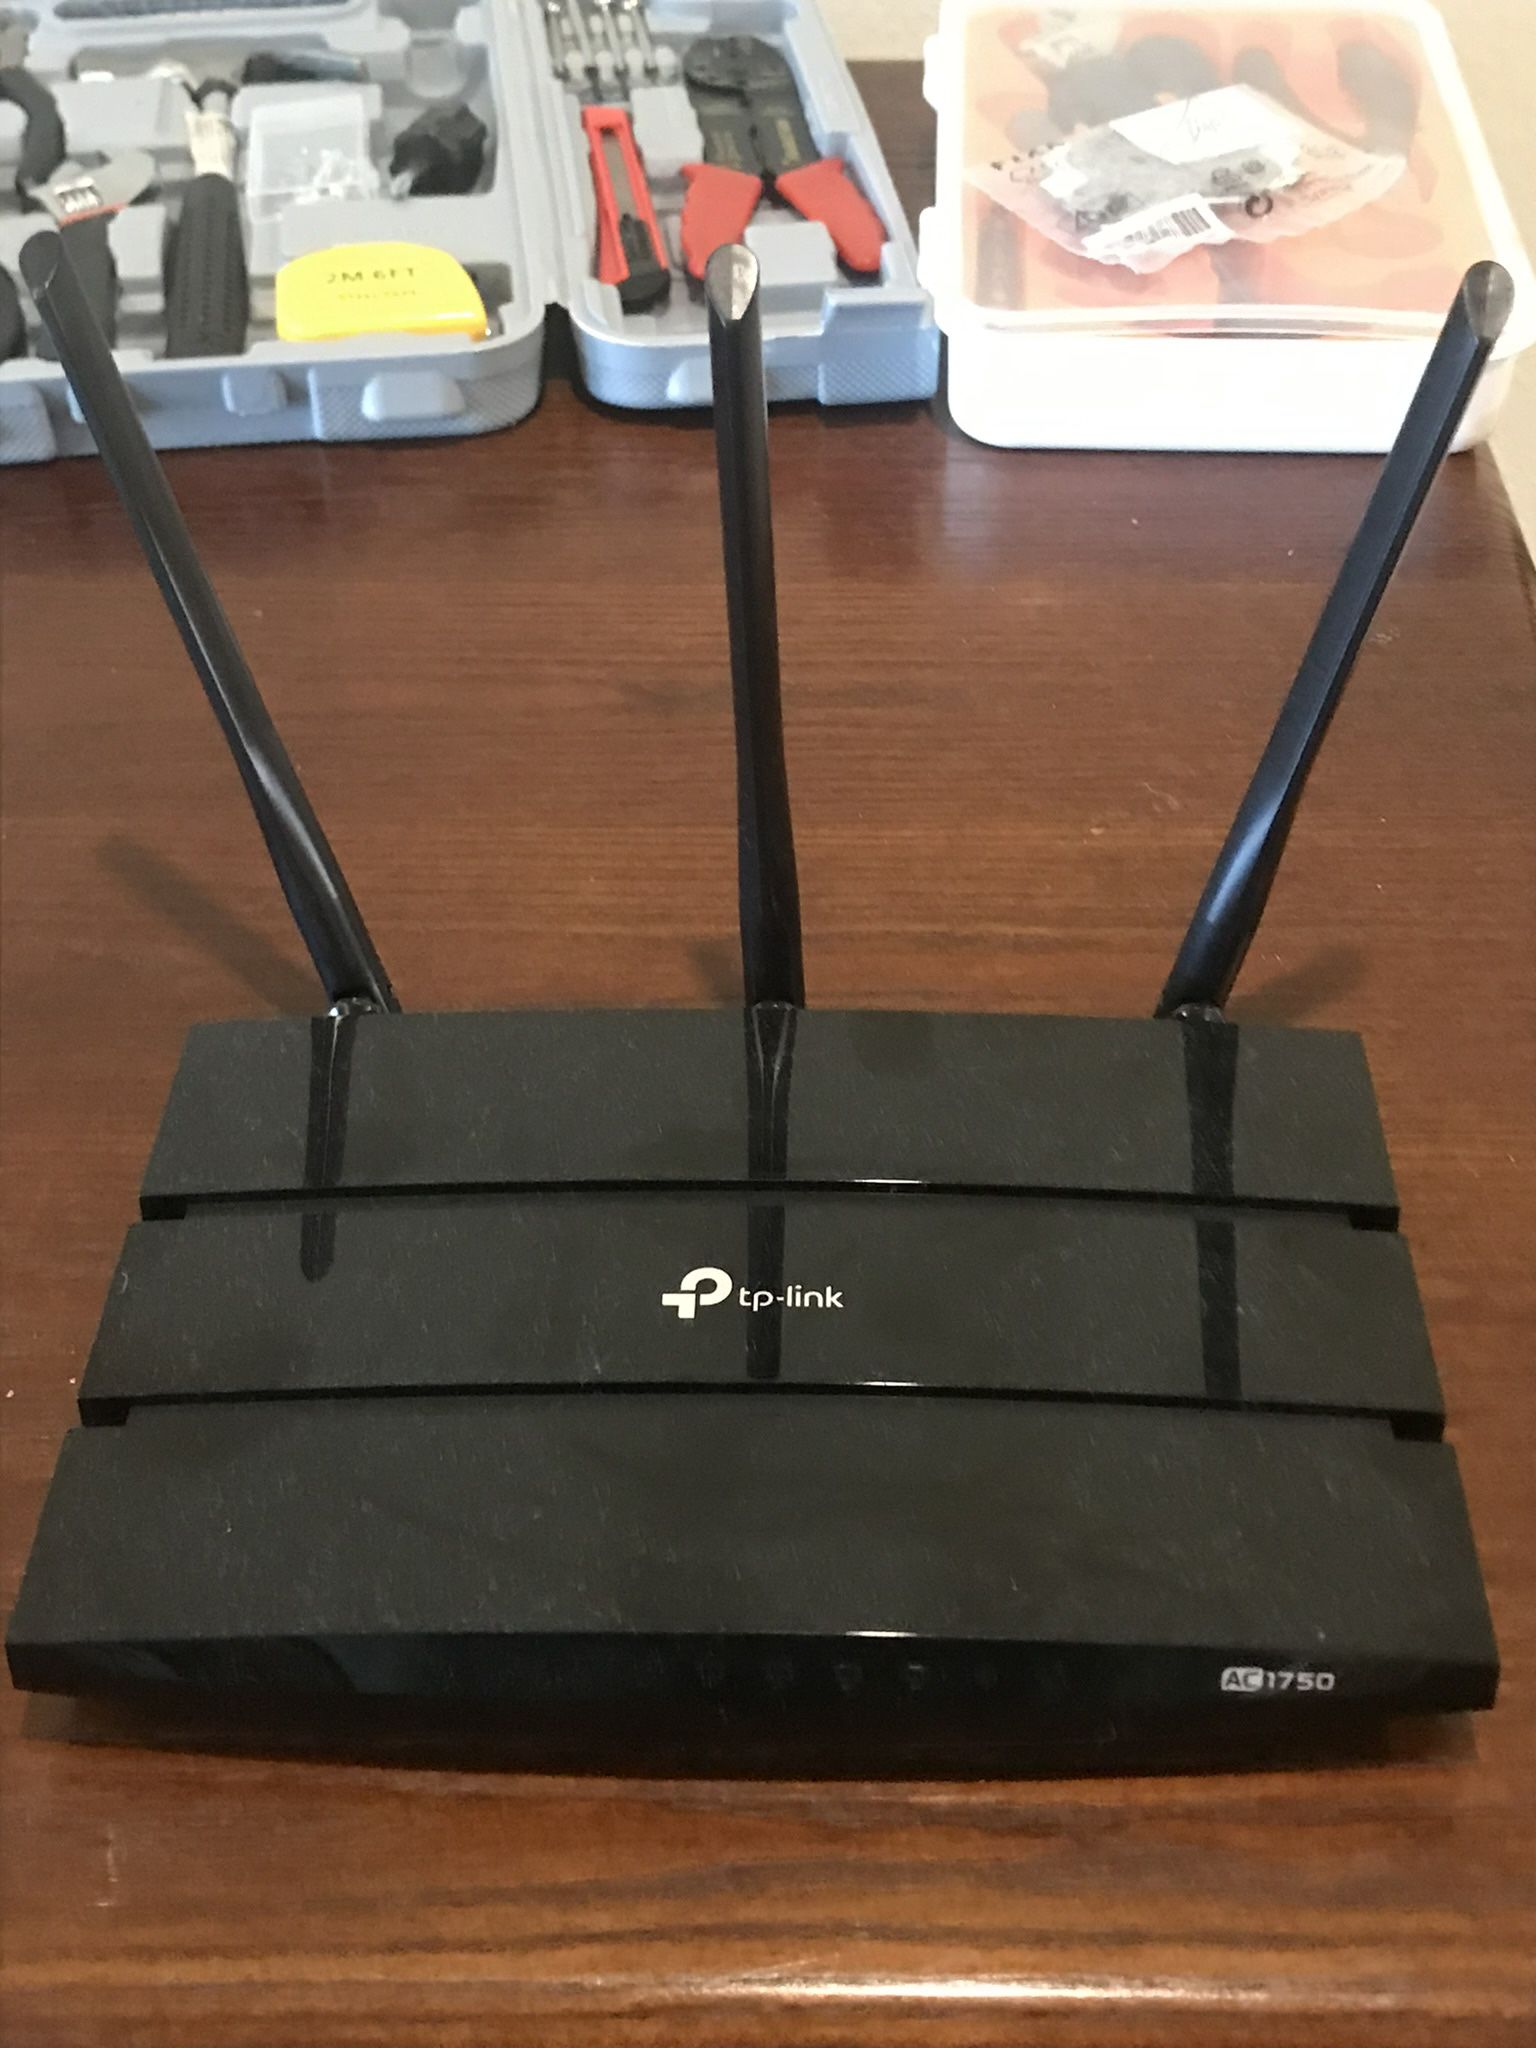 TP link router, good quality and comes with wire 